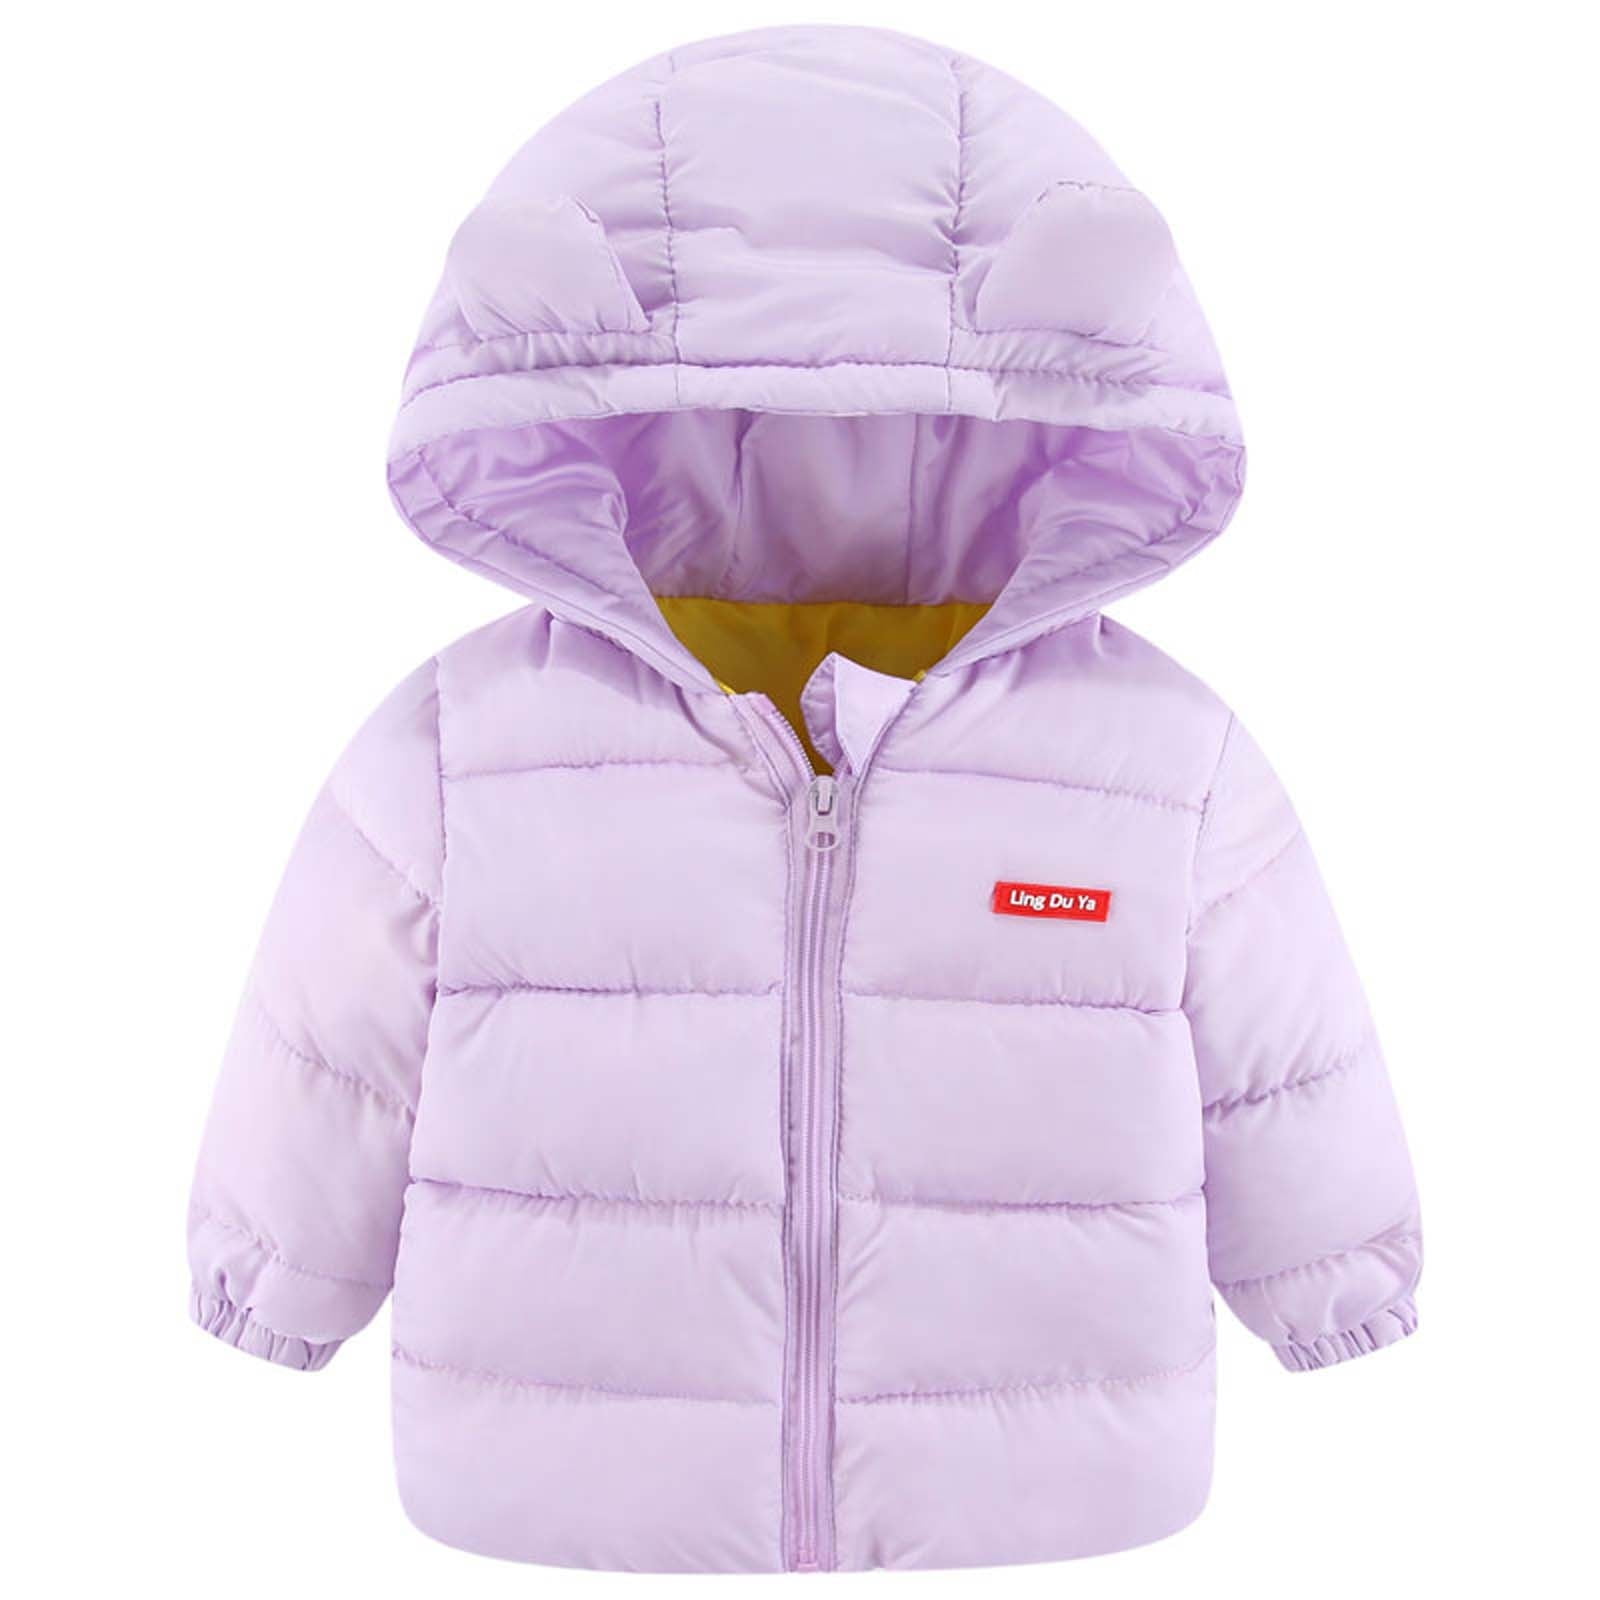 Longra Baby Boy Girl Childrens Cartoon Animal Hooded Coat Cotton Hooded Jackets Zipper Tops Clothes Coat Boys Clothes Suitable for 1-5 Years Old 